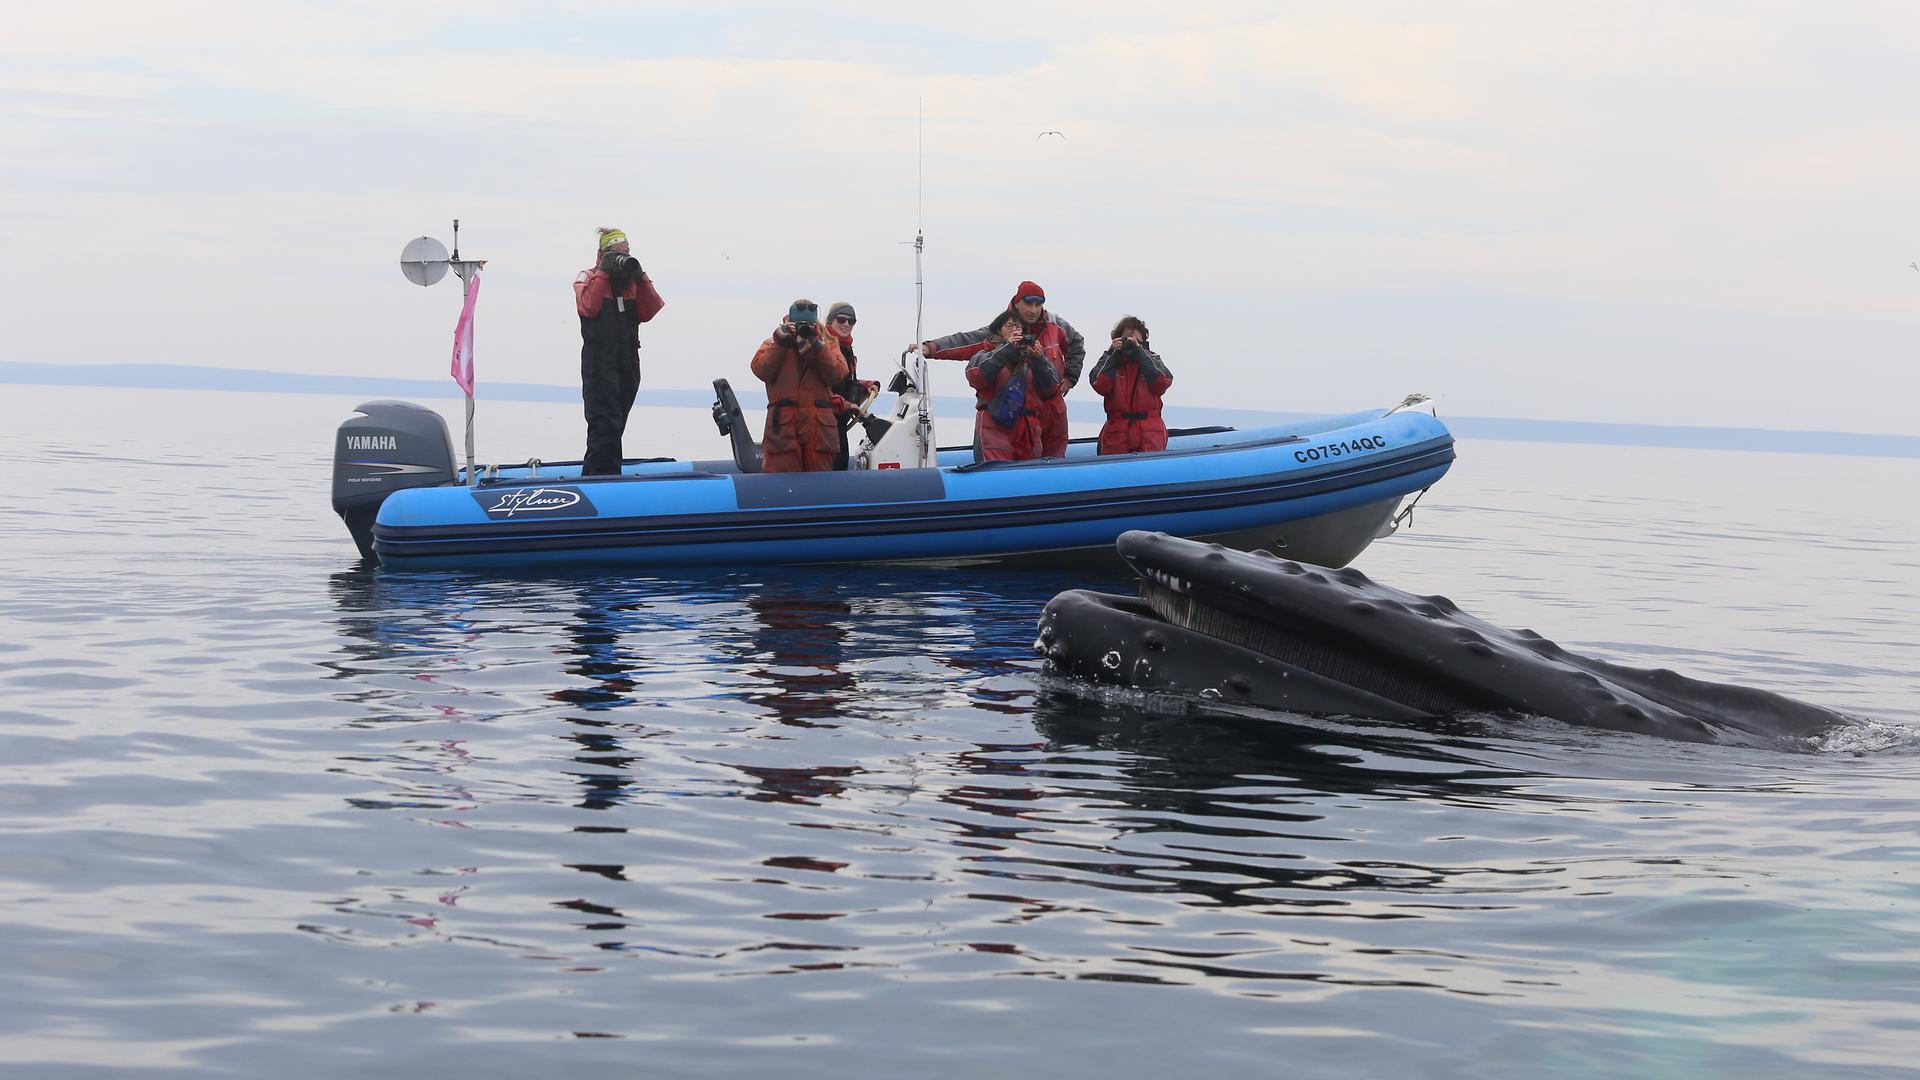 Anna Schleimer studied the grey whales off the coast of Vancouver Island, B.C. and the humpback whales in the Gulf of St Lawrence, Quebec